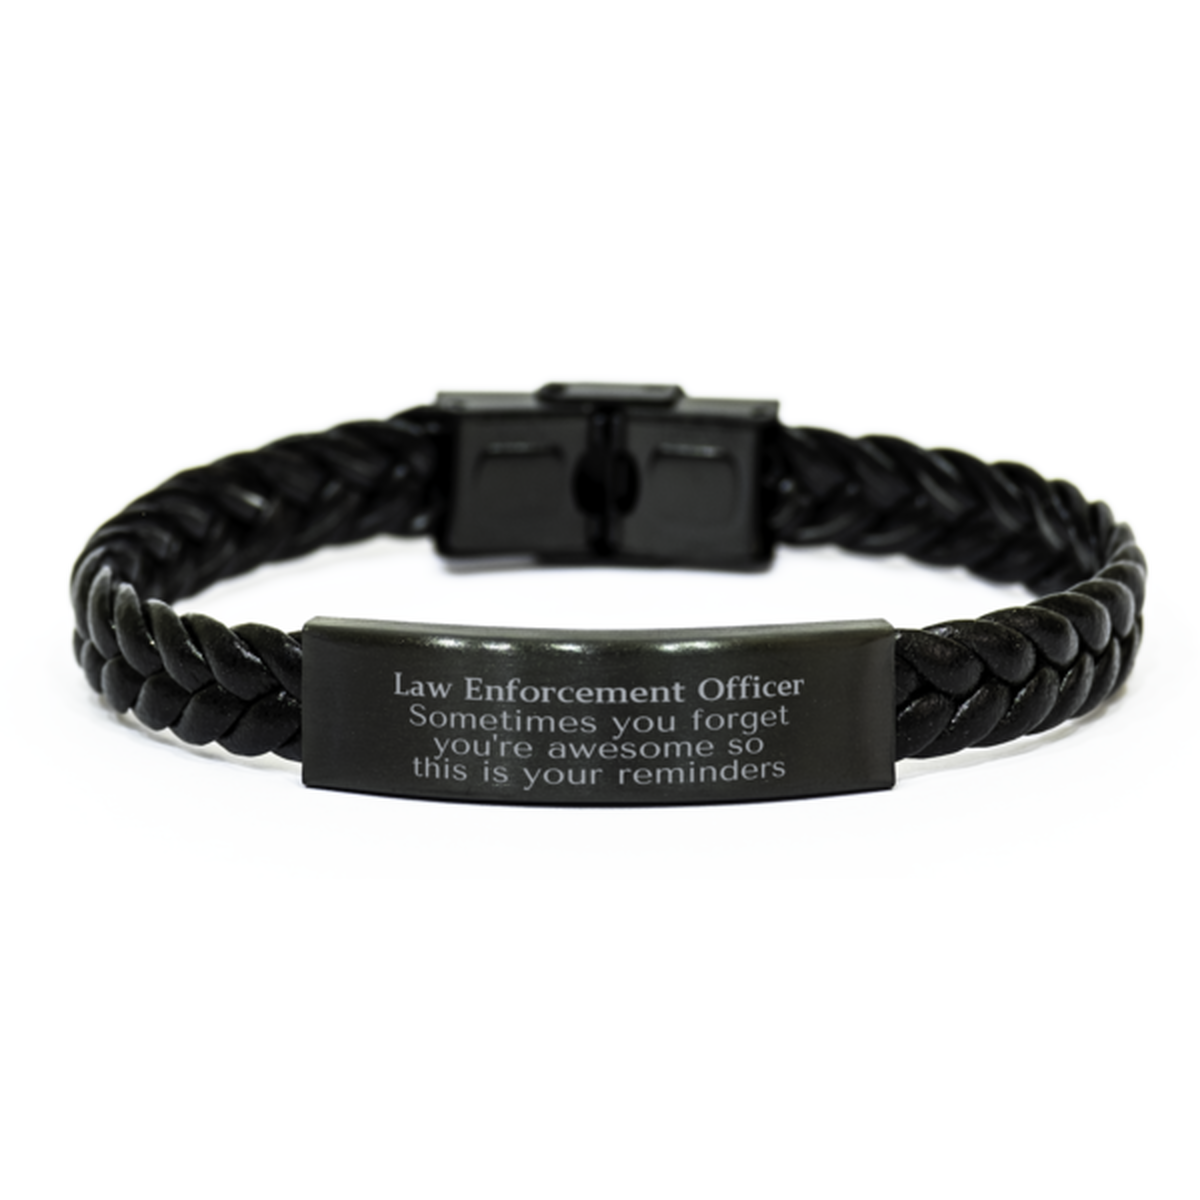 Sentimental Law Enforcement Officer Braided Leather Bracelet, Law Enforcement Officer Sometimes you forget you're awesome so this is your reminders, Graduation Christmas Birthday Gifts for Law Enforcement Officer, Men, Women, Coworkers